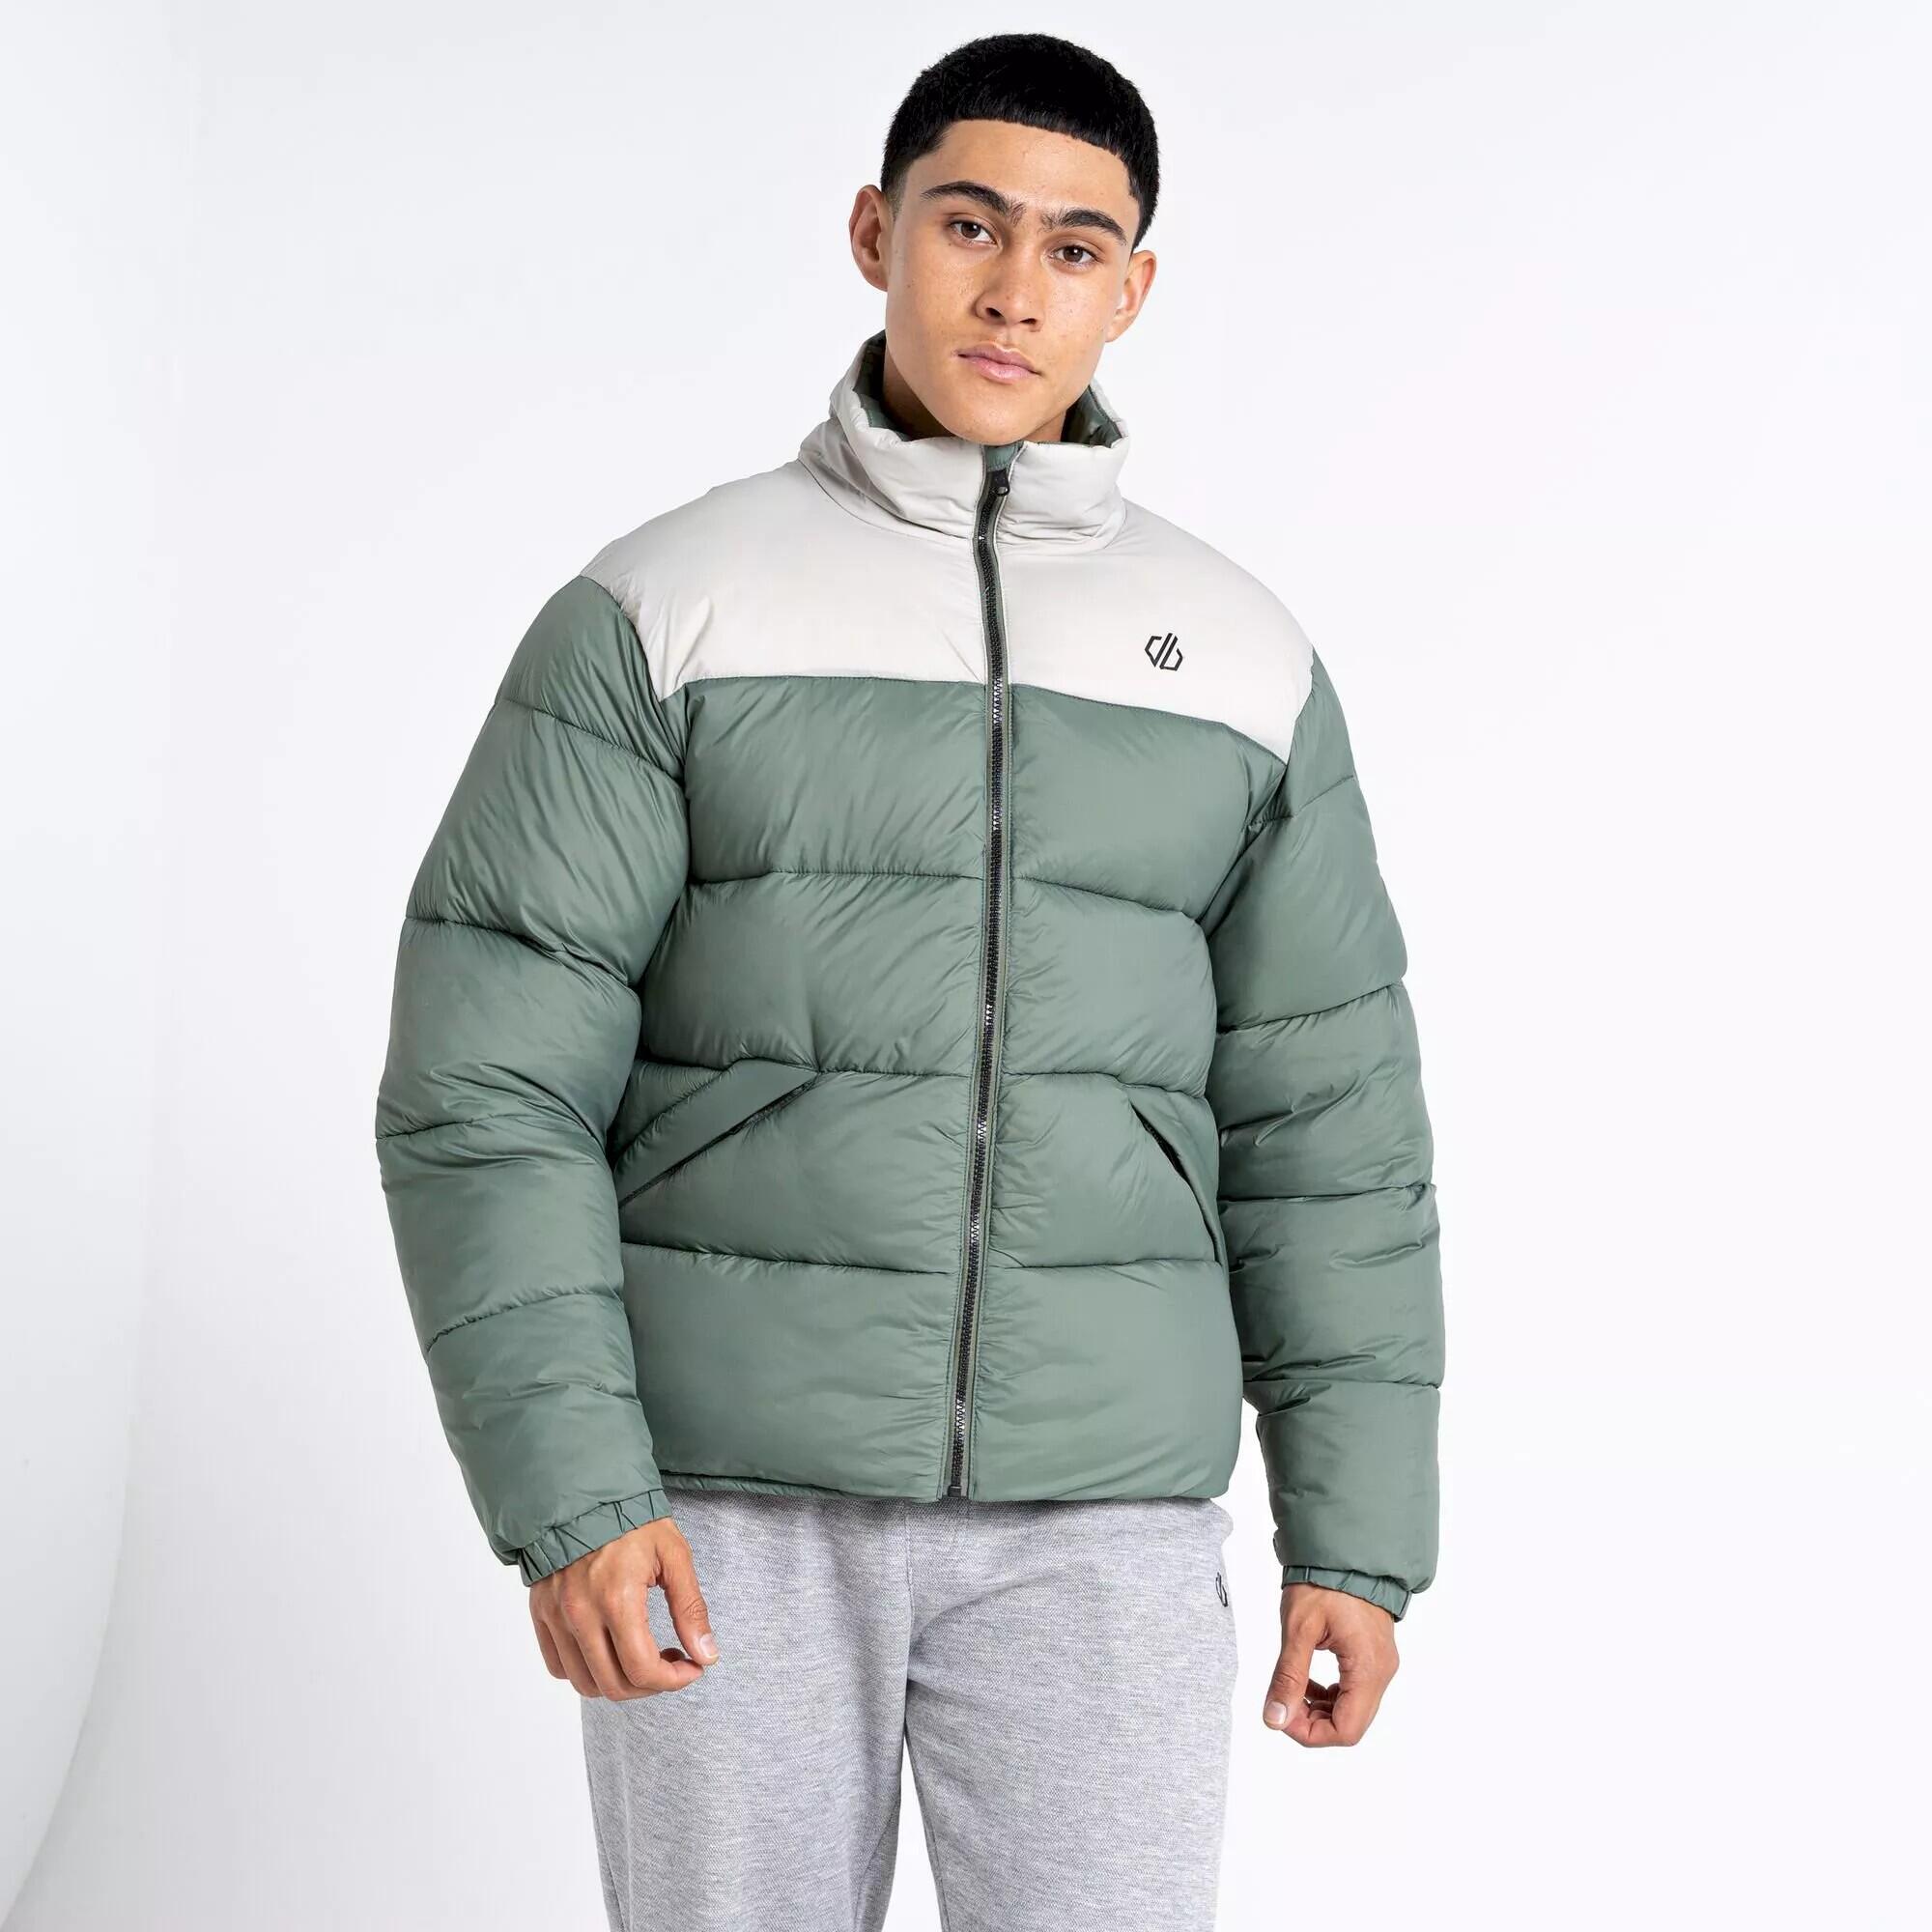 Mens The Jermaine Jenas Edit Mentor Padded Jacket (Duck Green/Willow Grey) 4/5